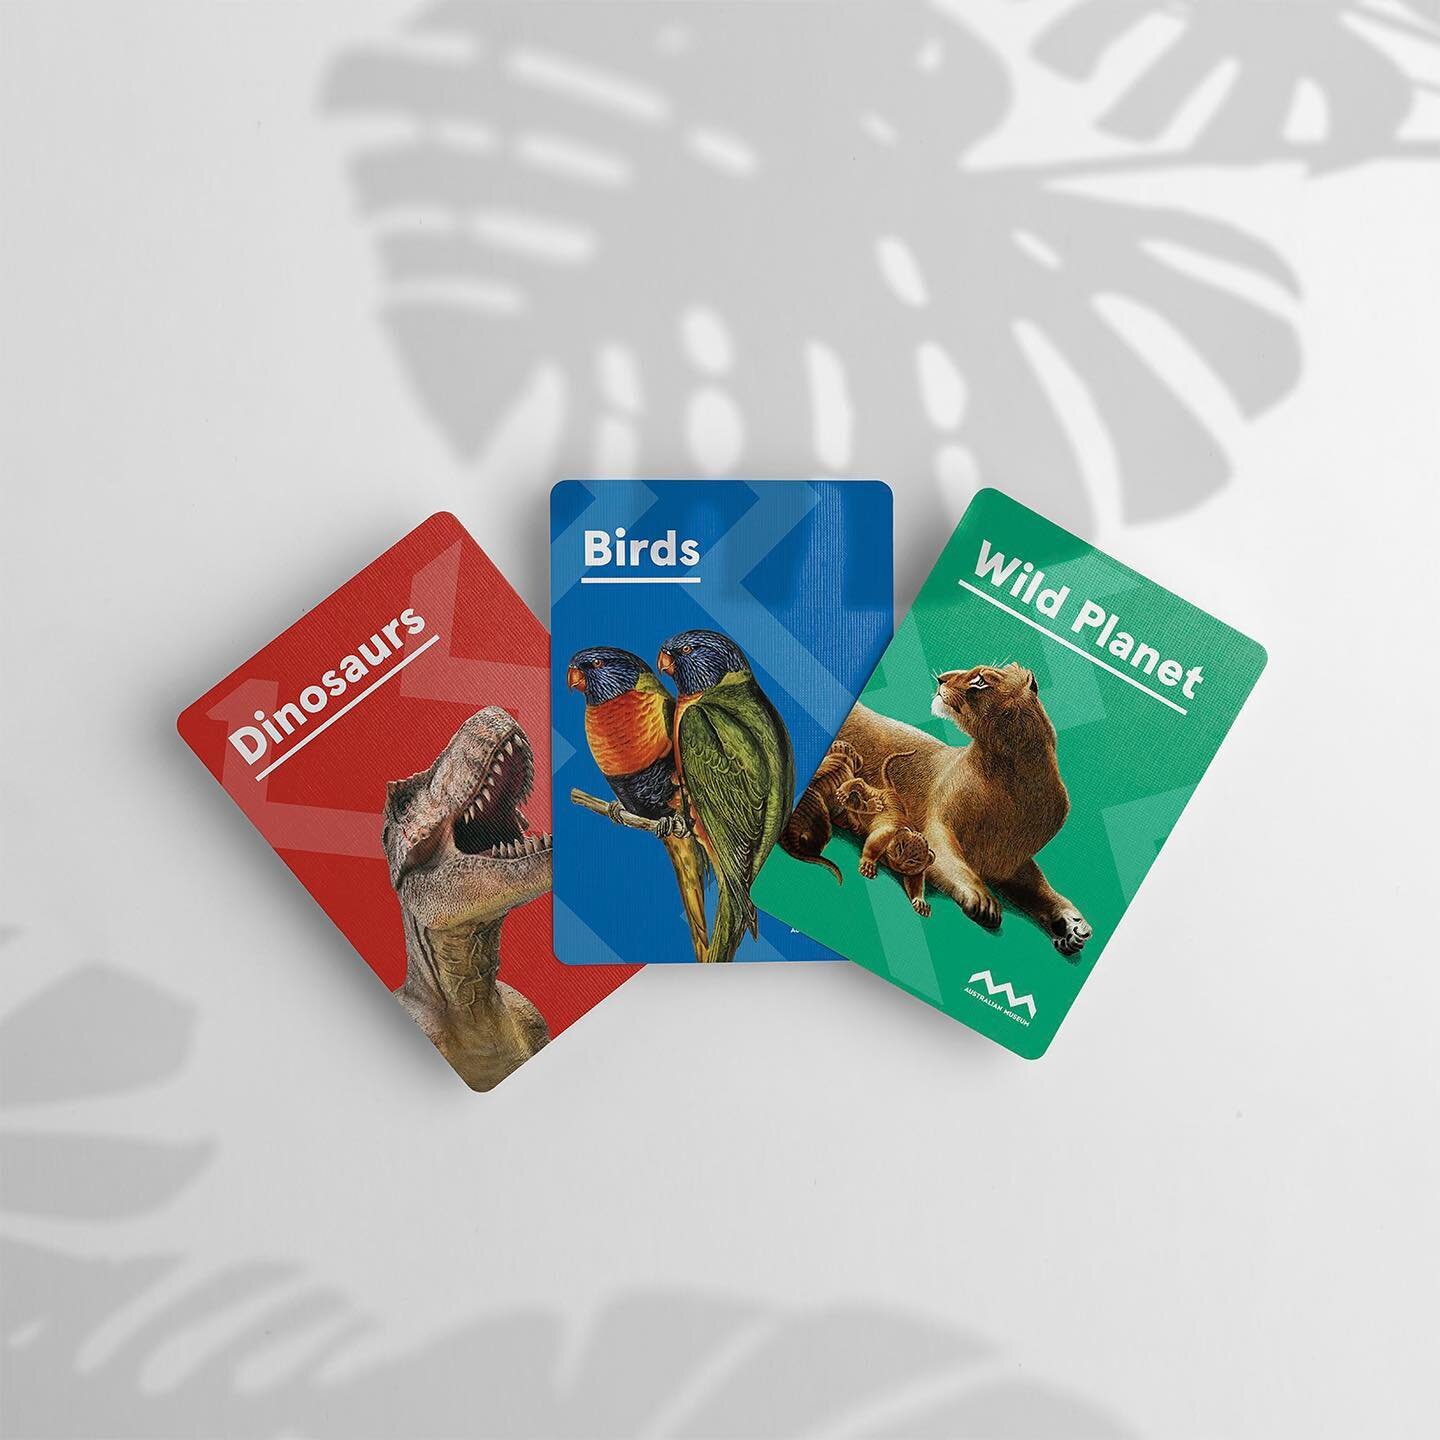 Conversation starter cards developed for the Australian Museum.
The pack of 50+ cards uses a series of thought-provoking prompts to ignite creative dialogue and help young visitors investigate the specimens and objects on display at the Australian Mu